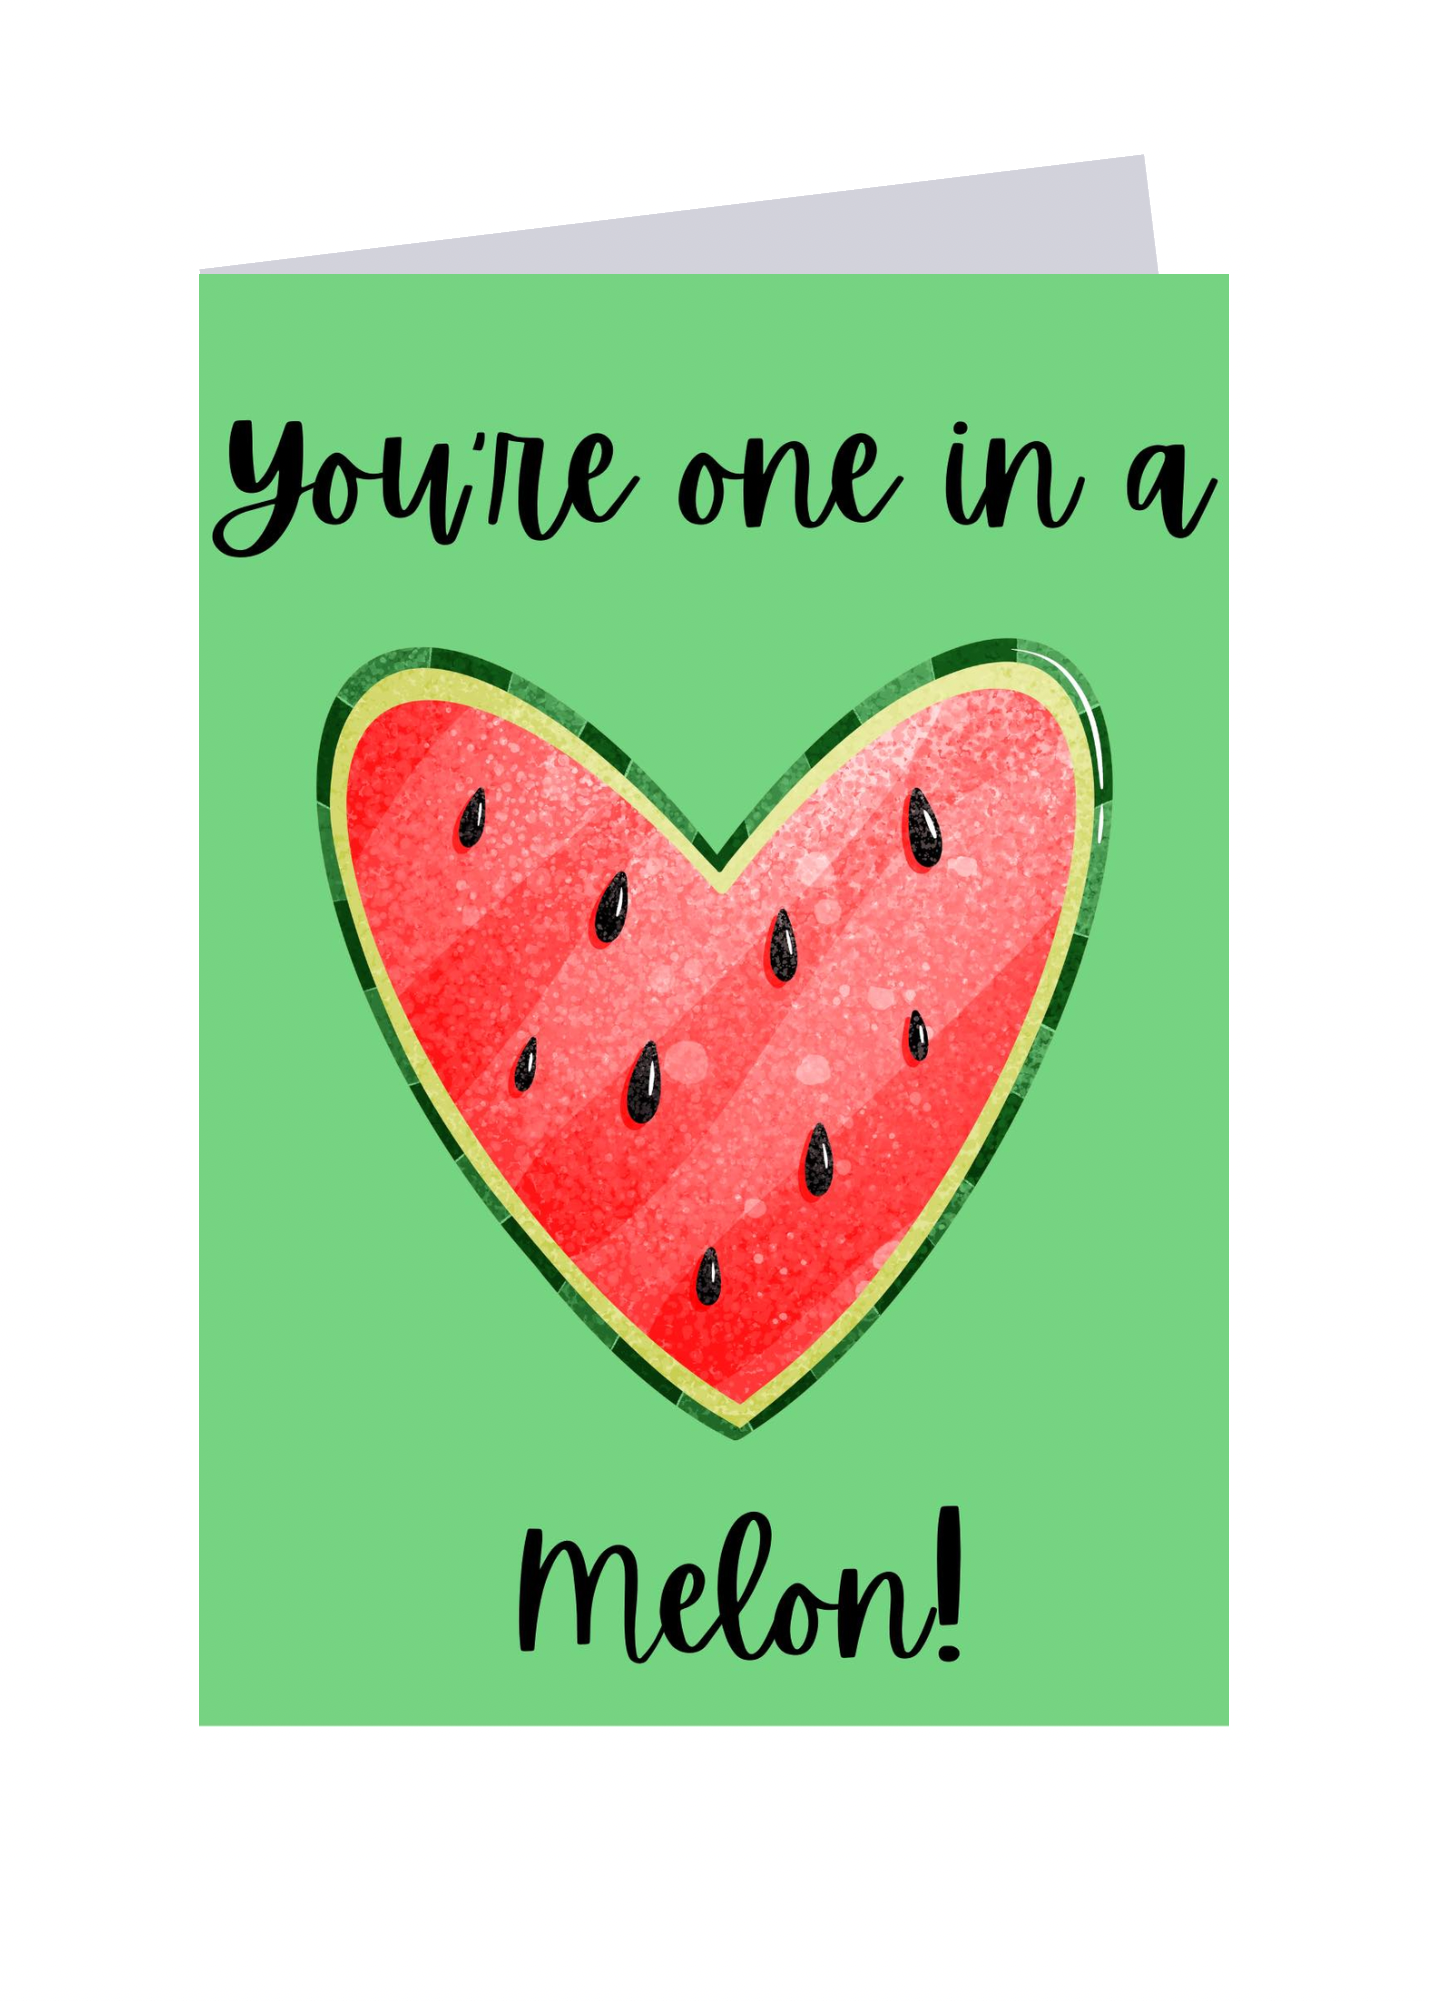 You’re one in a Melon!